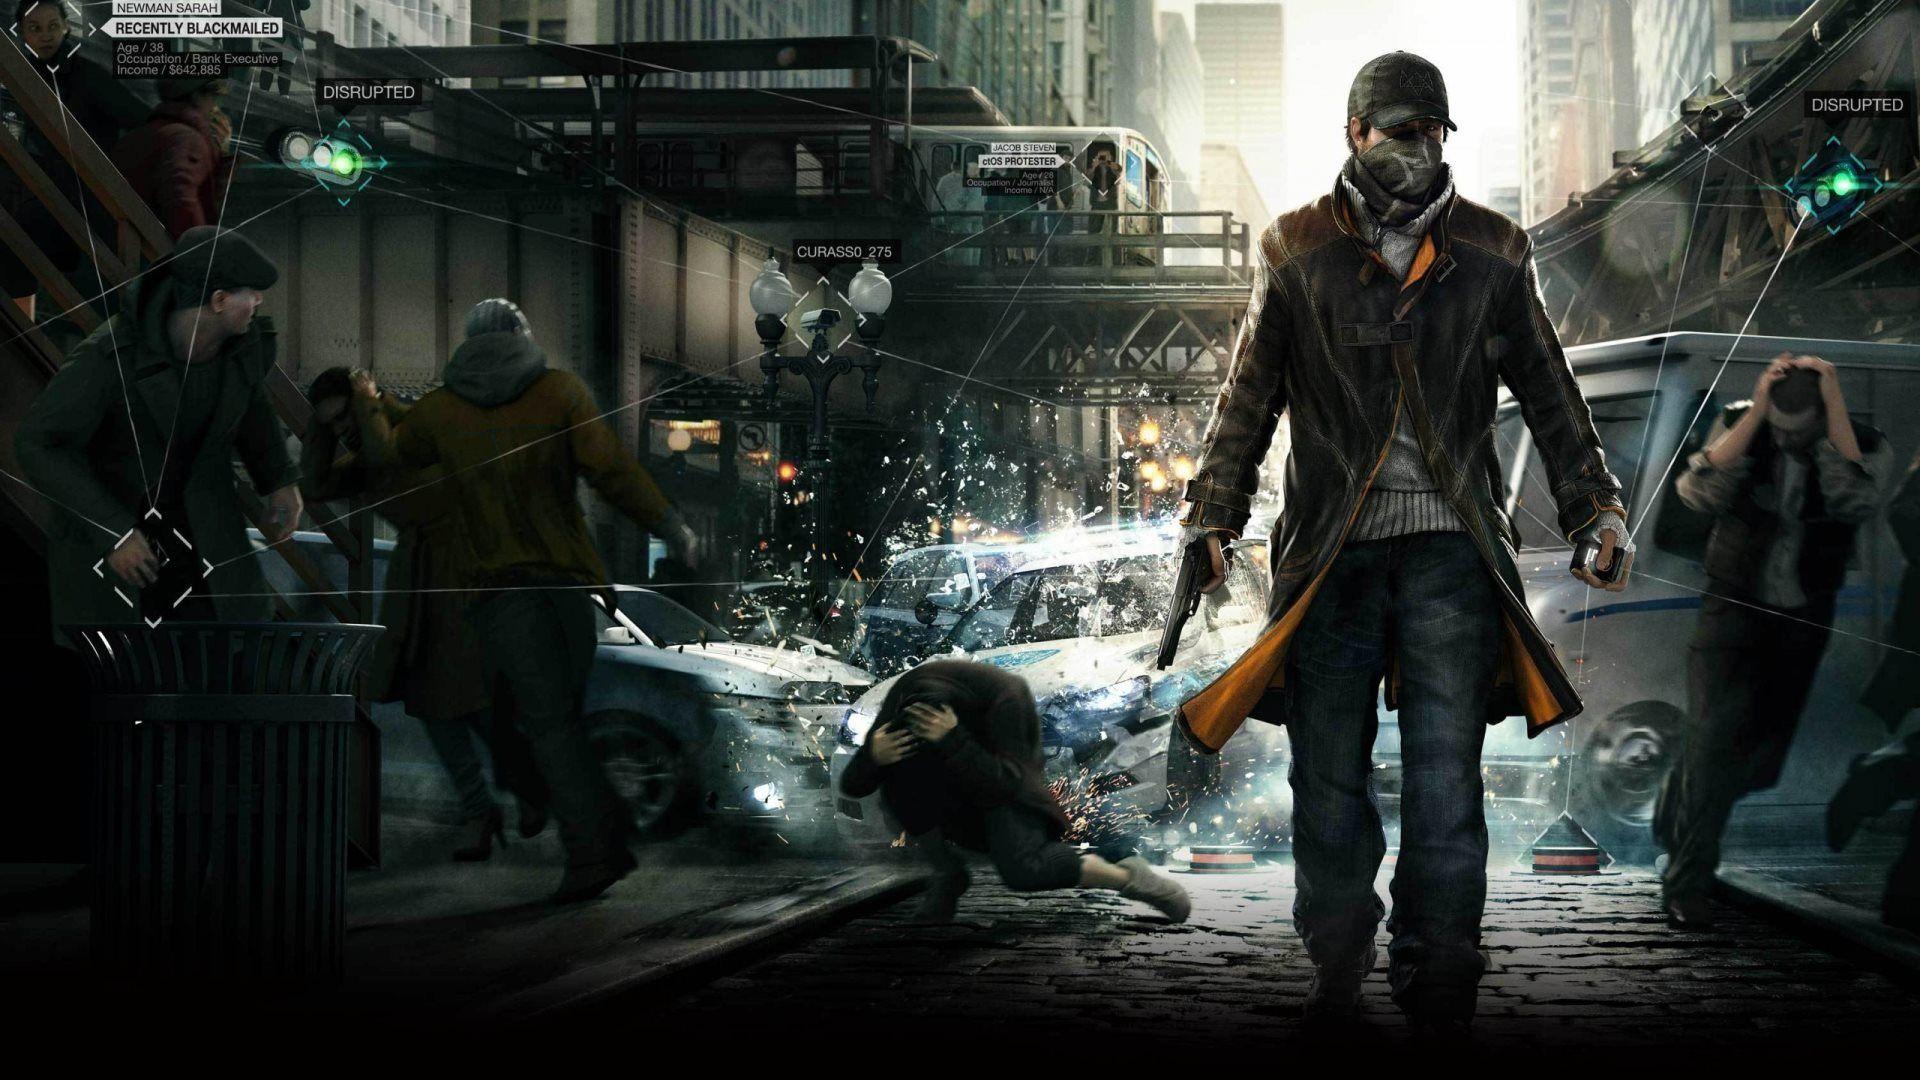 Watch Dogs Wallpaper in HD, 4K and wide sizes